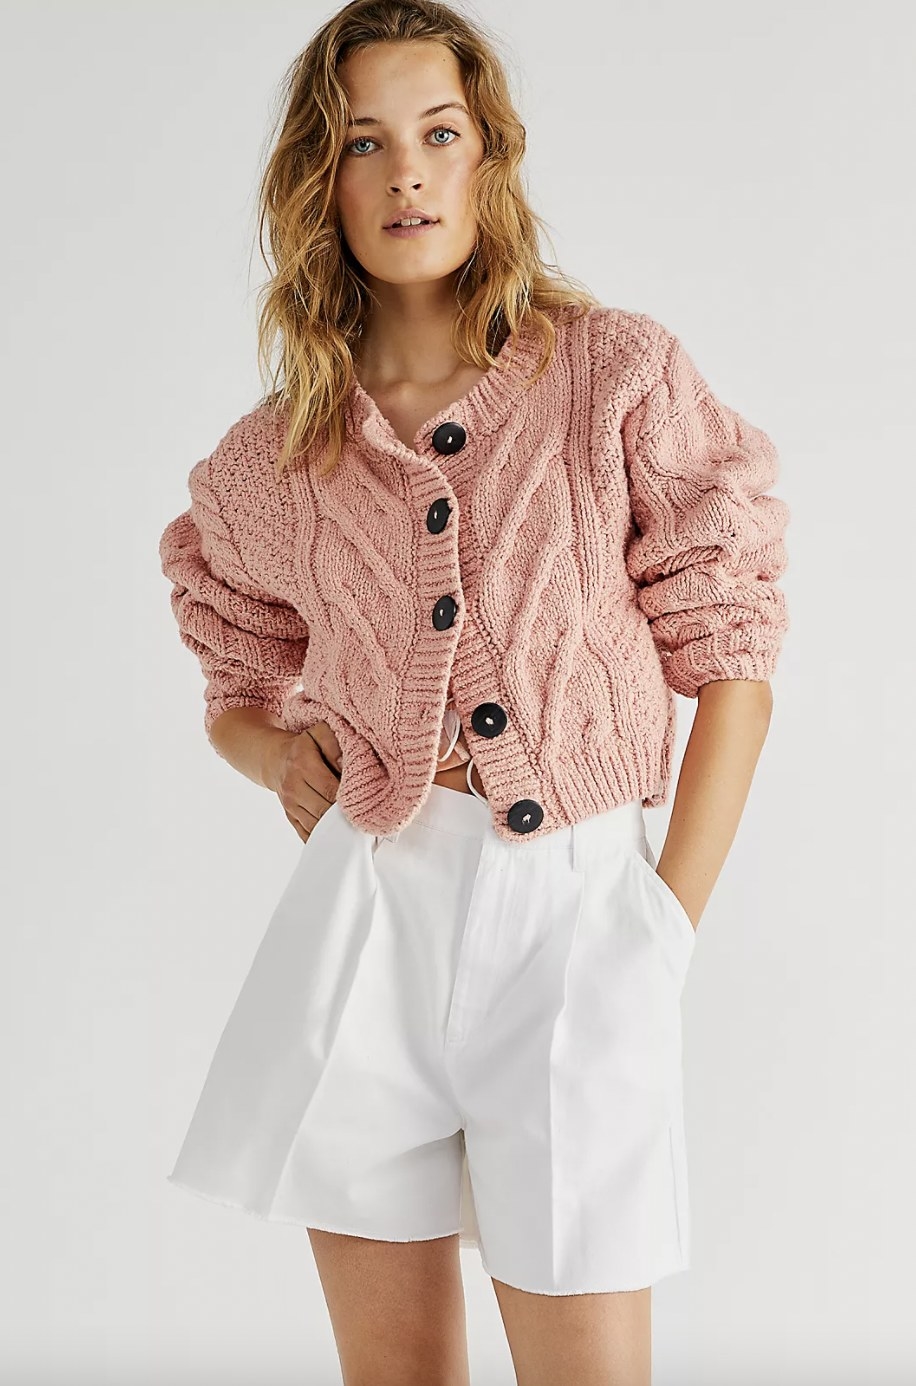 30 Pieces Of Clothing From Free People That You'll Love